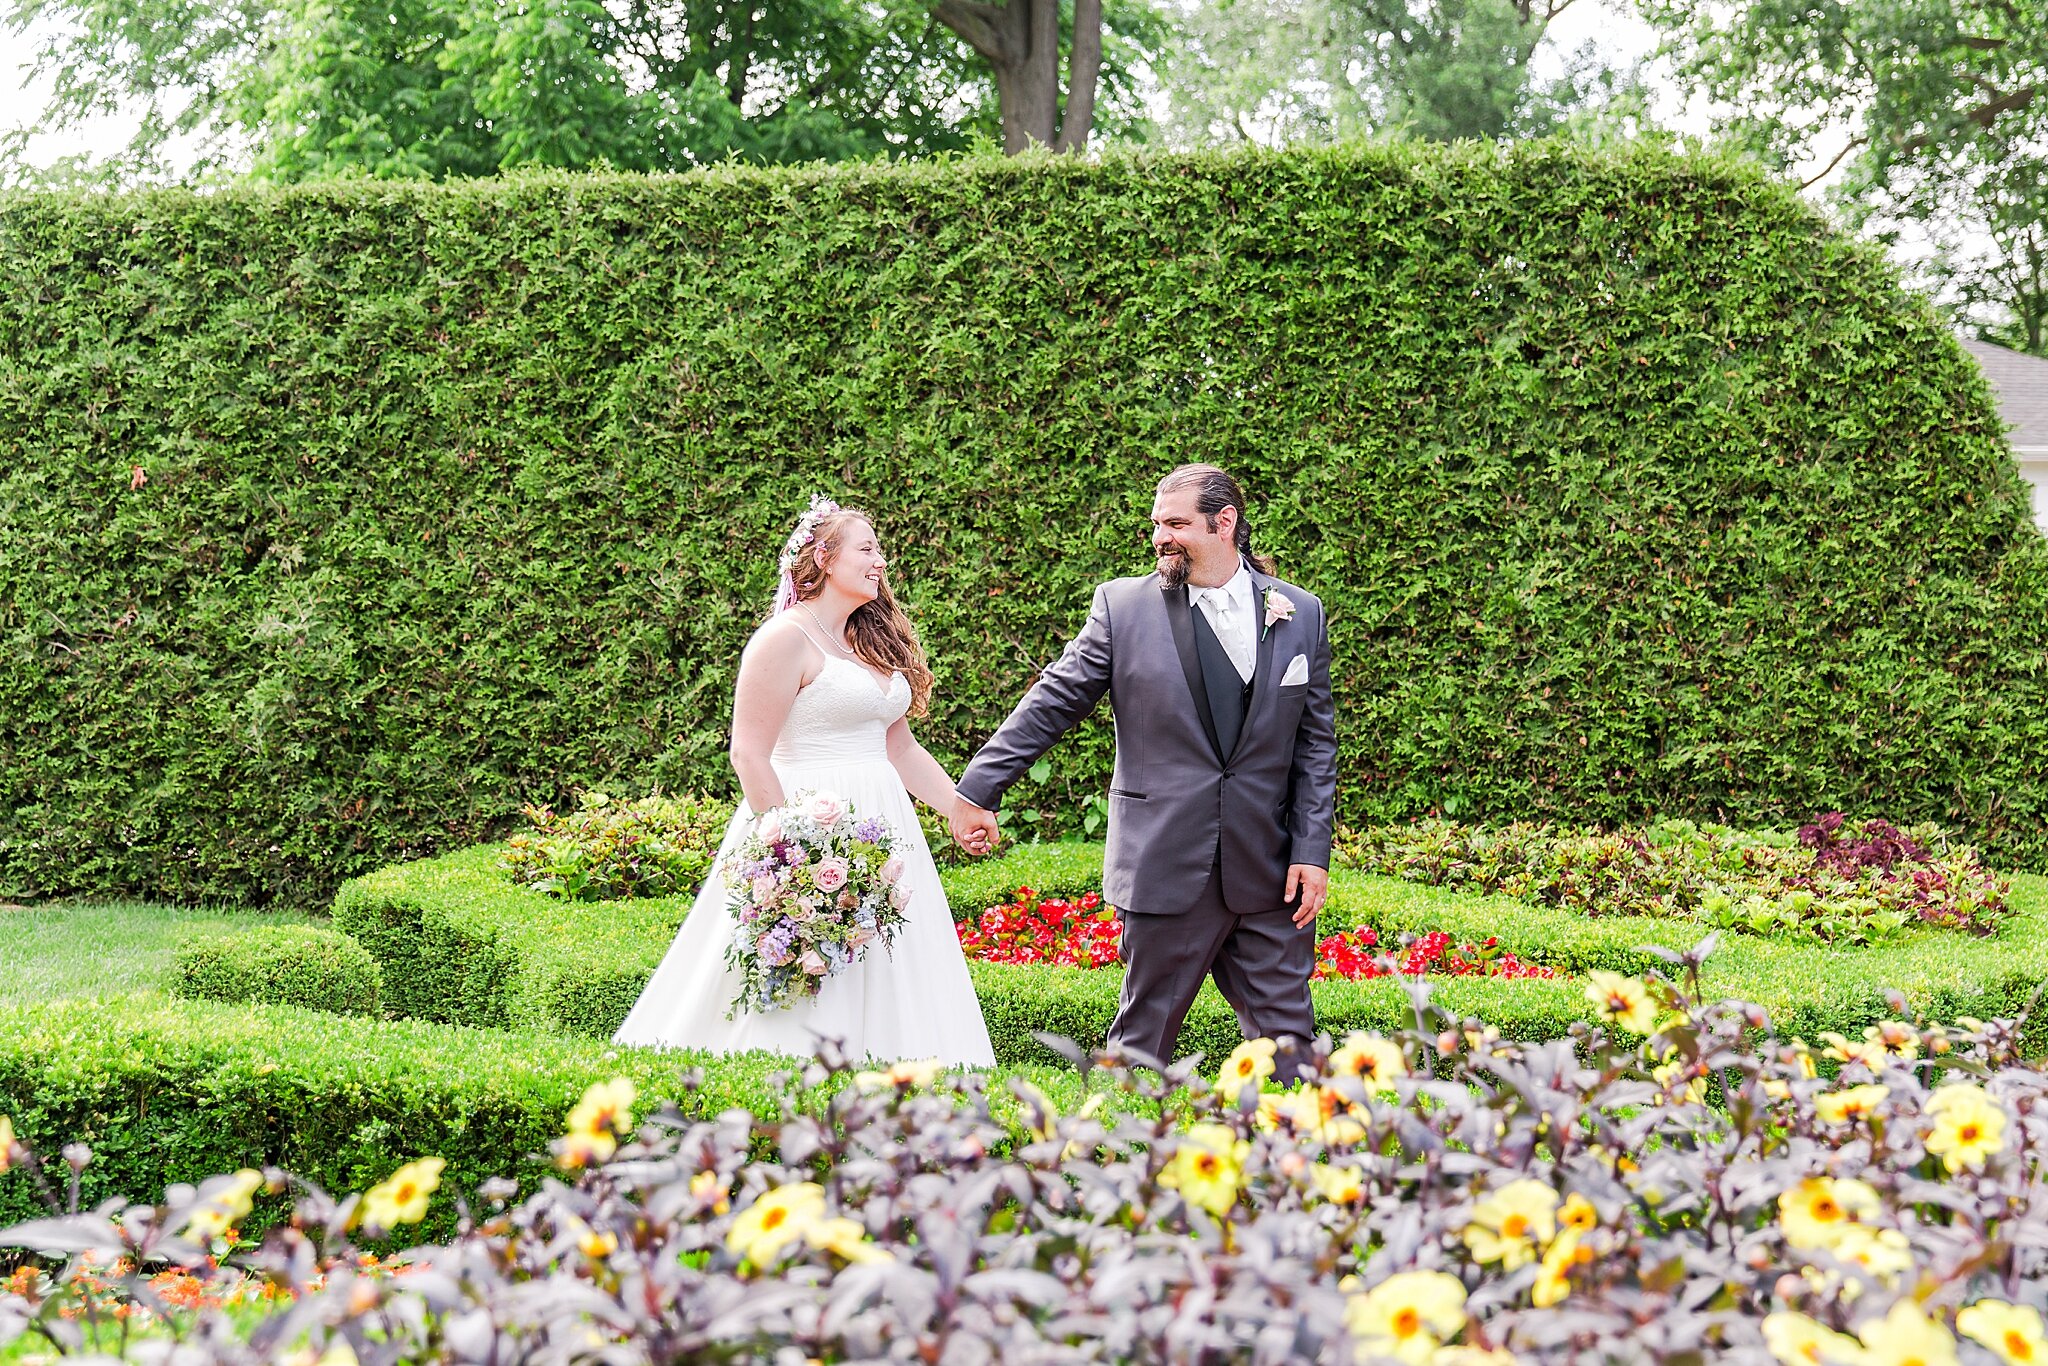 detroit-wedding-photographer-english-garden-inspired-wedding-photos-at-taylor-conservatory-and-botanical-gardens-in-taylor-mi-by-courtney-carolyn-photography_0039.jpg